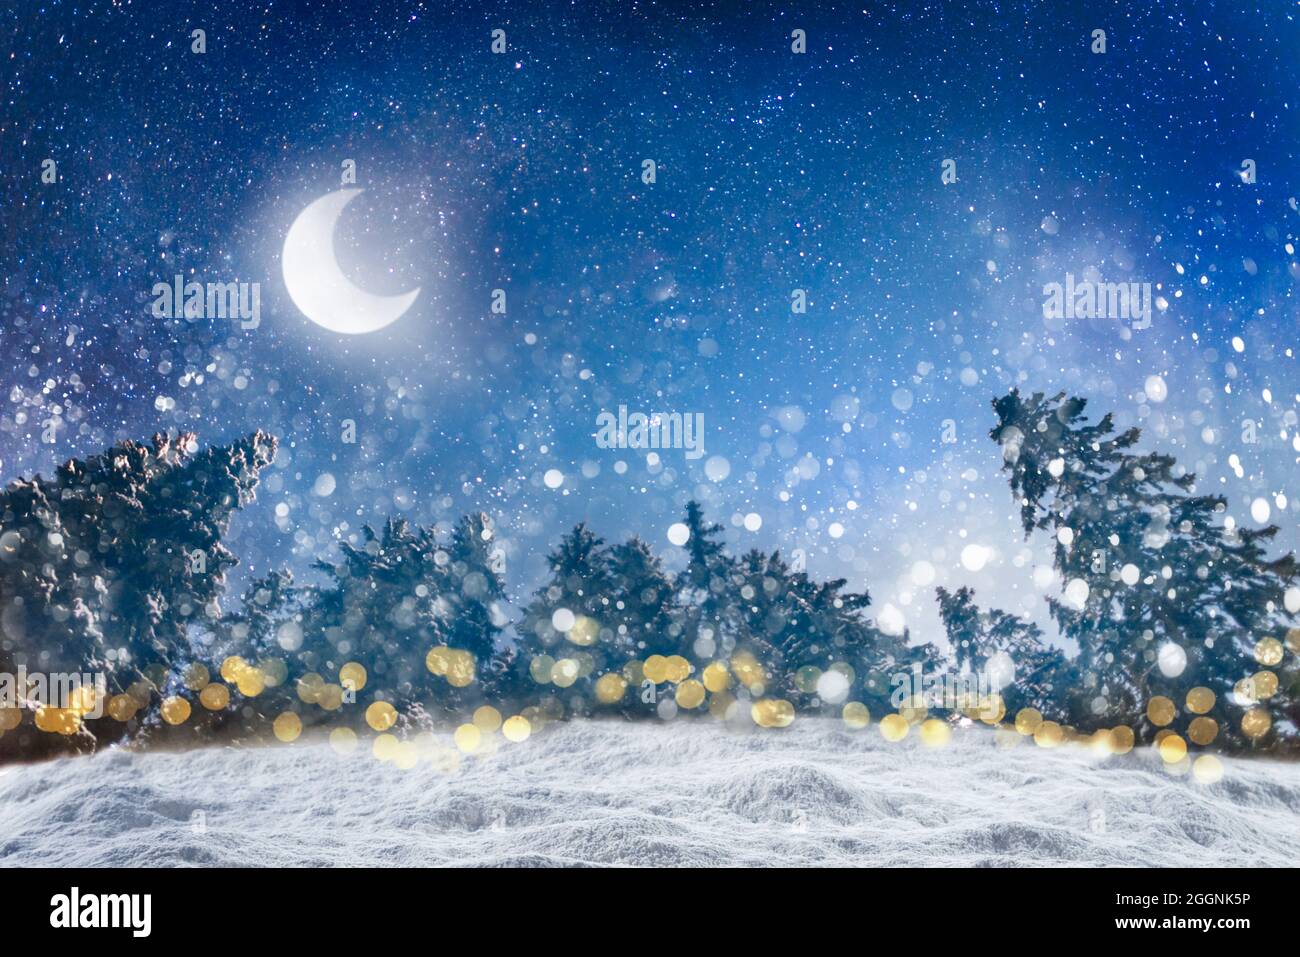 Old winter background for Merry Christmas and Happy New Year with fluffy snowdrifts against background of night winter forest, falling snow and dark s Stock Photo